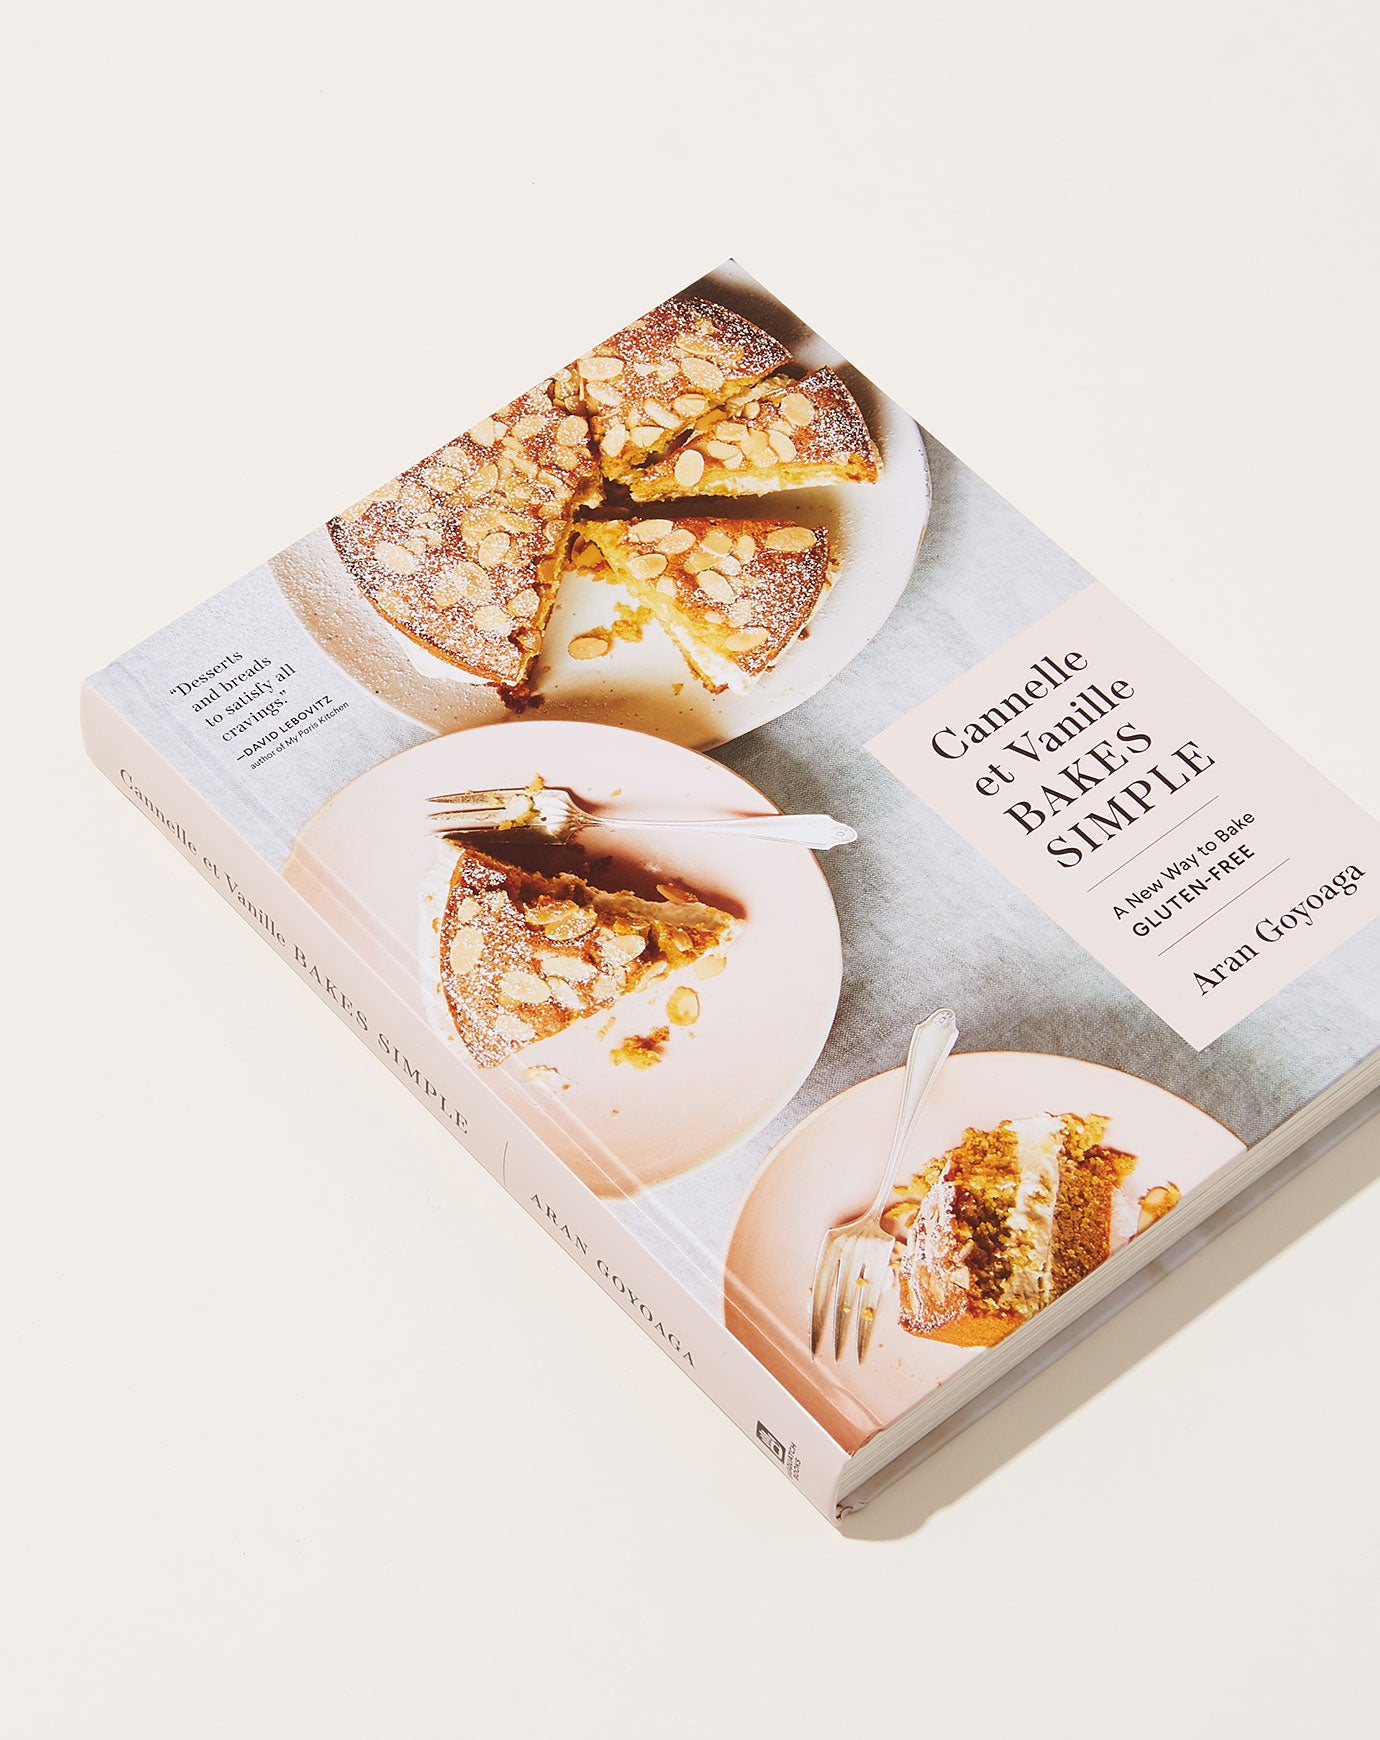 Cannelle et Vanille Bakes Simple: A New Way To Bake Gluten-Free